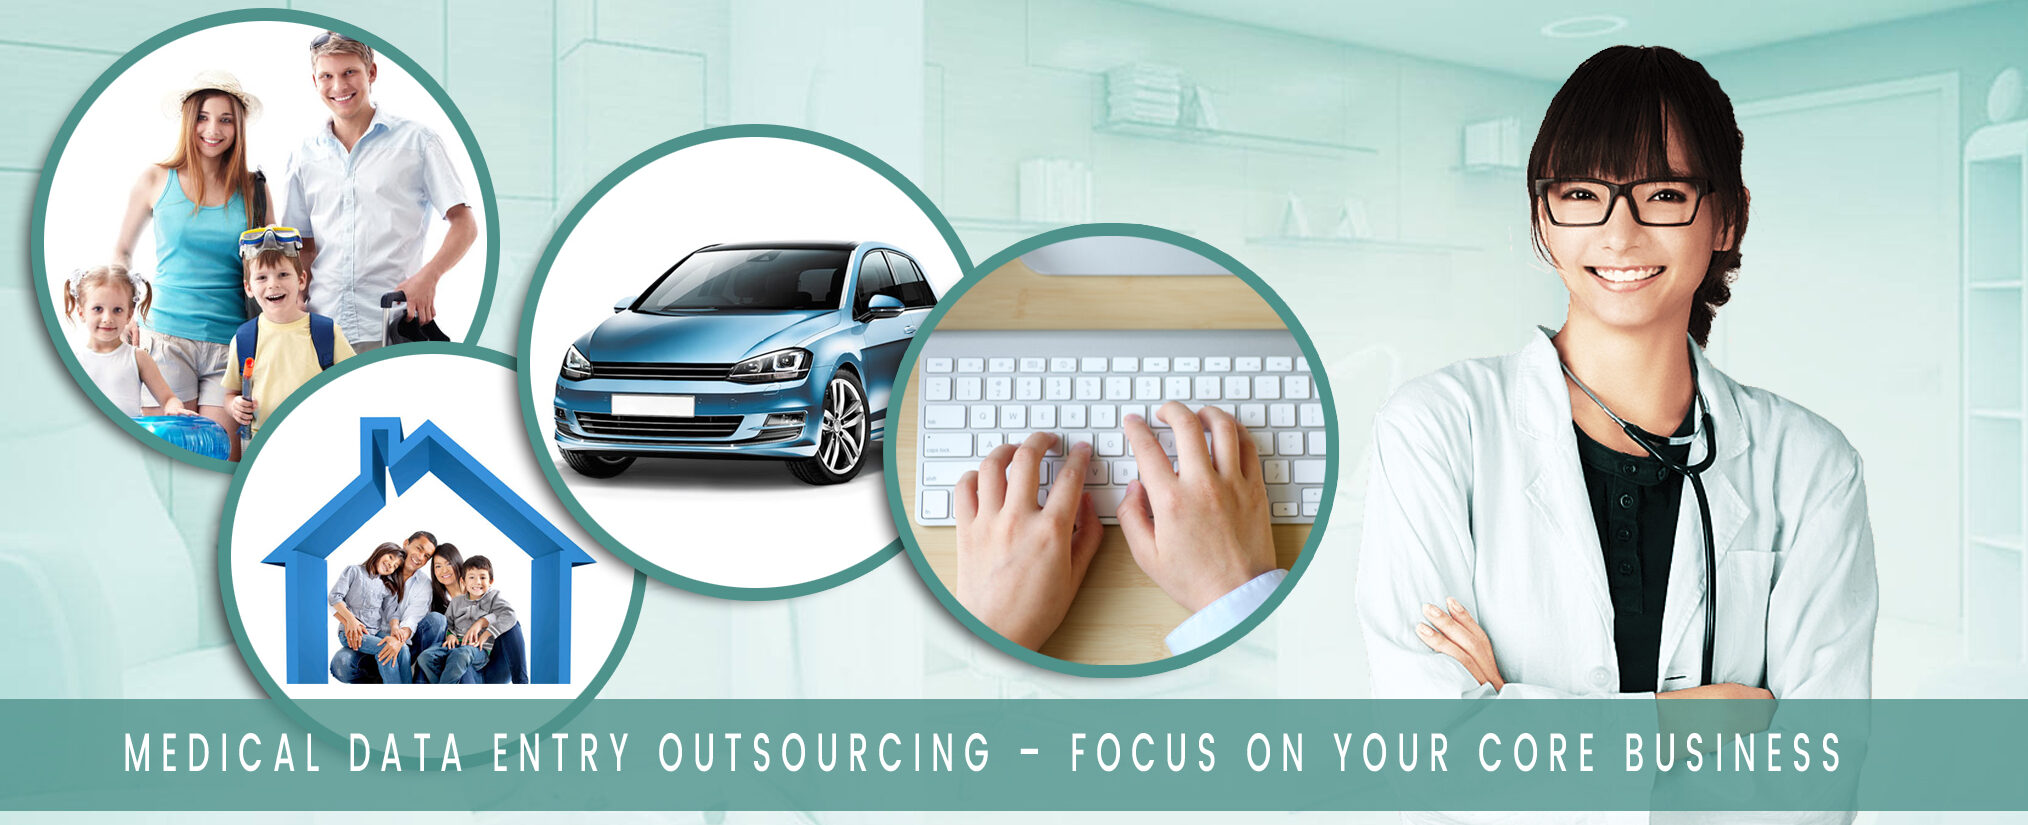 Medical-Data-Entry-Outsourcing-–-Focus-on-your-core-business-copy